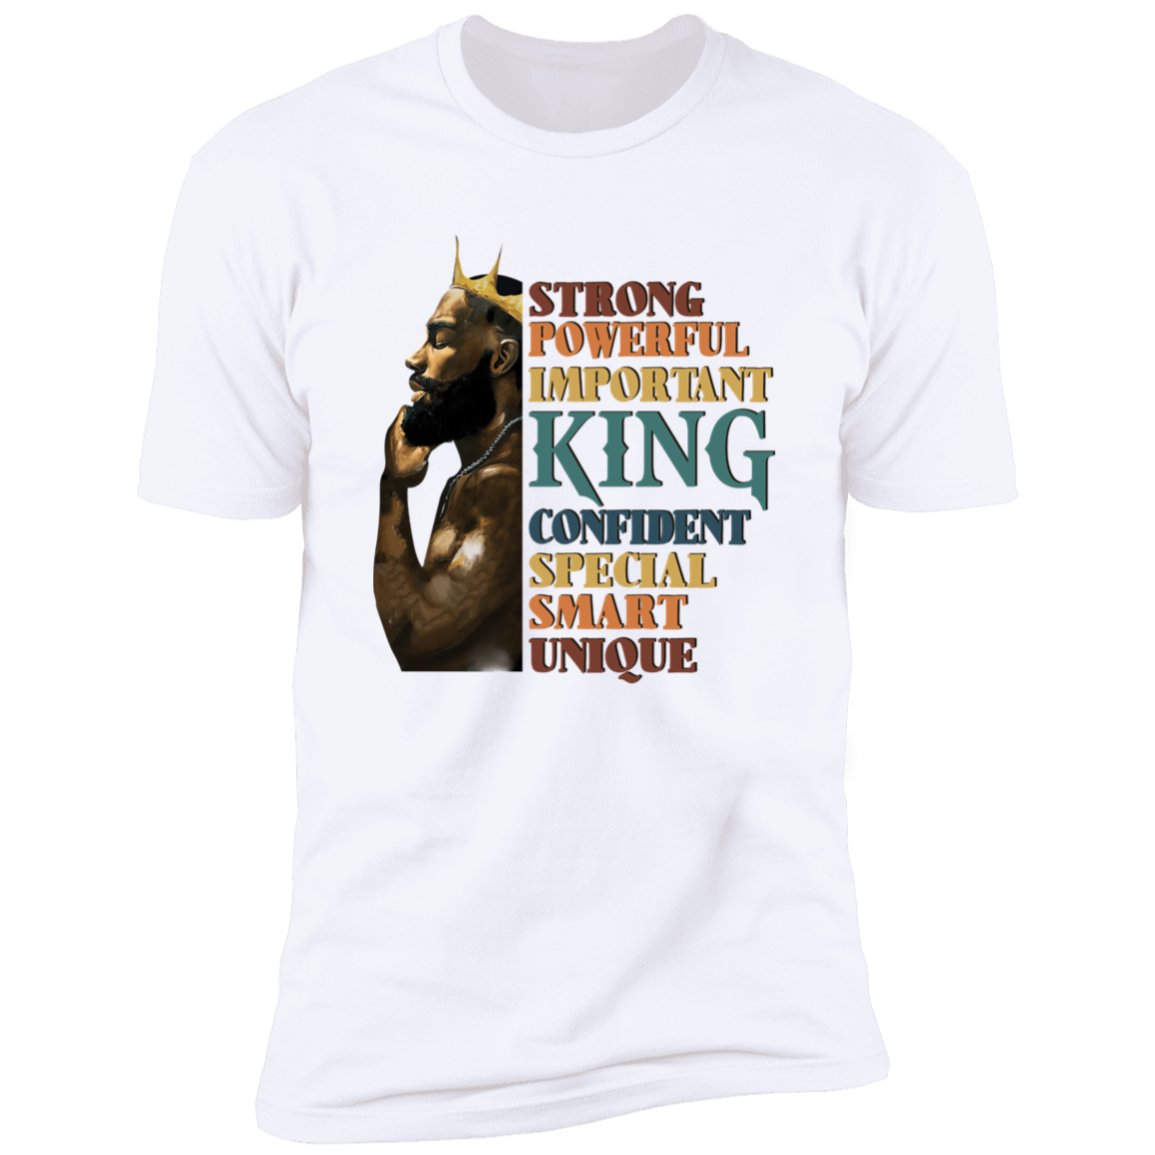 KING-STRONG-POWERFUL T-SHIRT